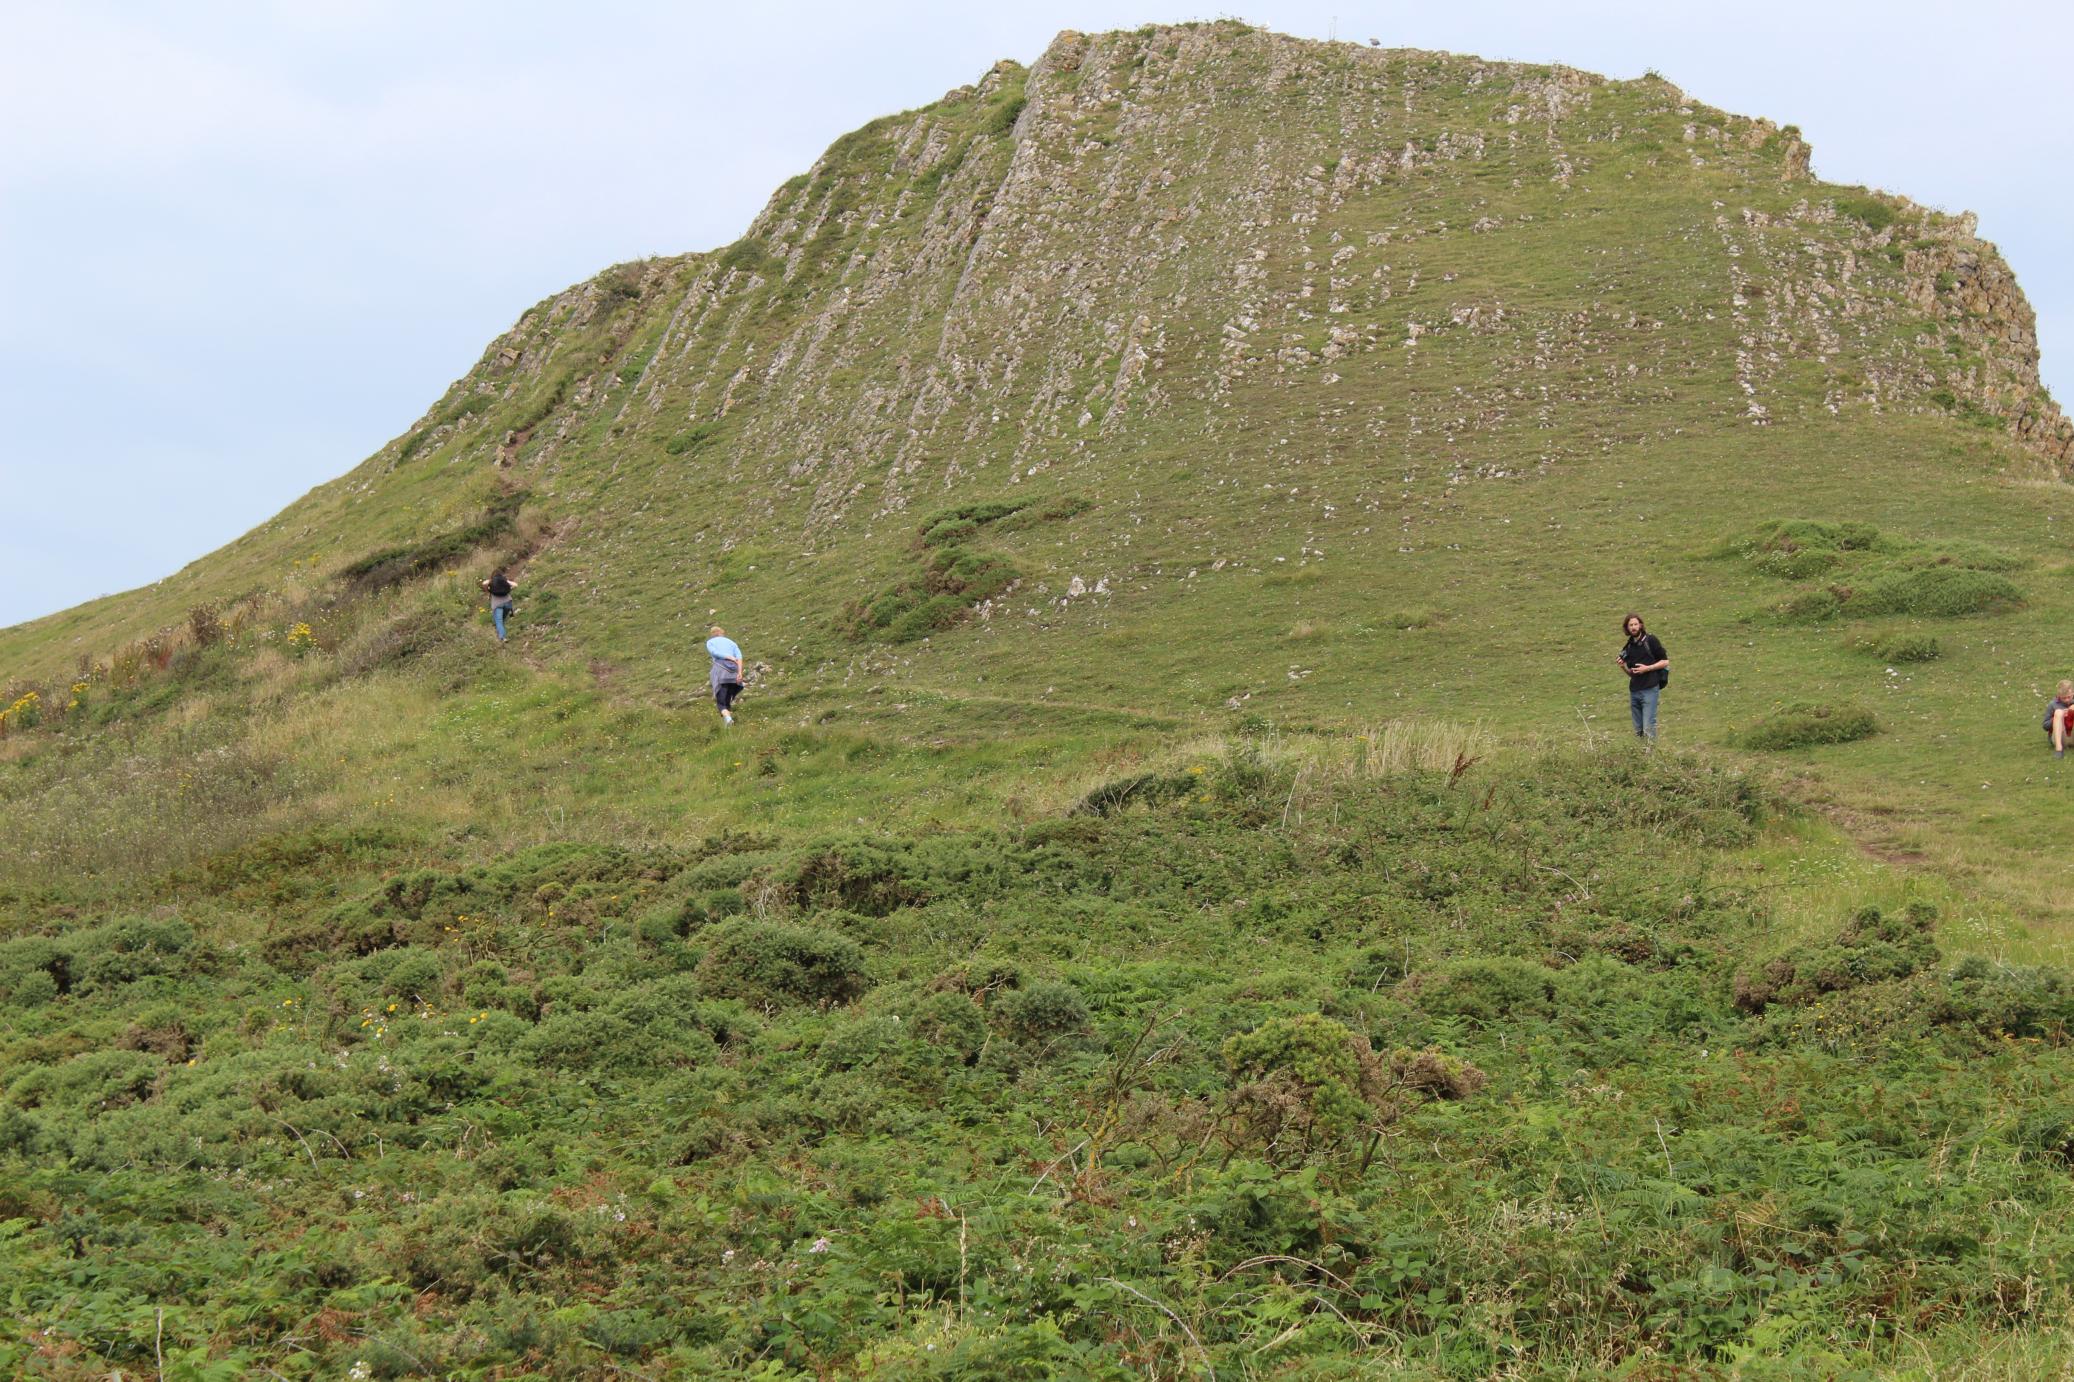 Saturday 30th July, on the Worms Head, Rhossili.